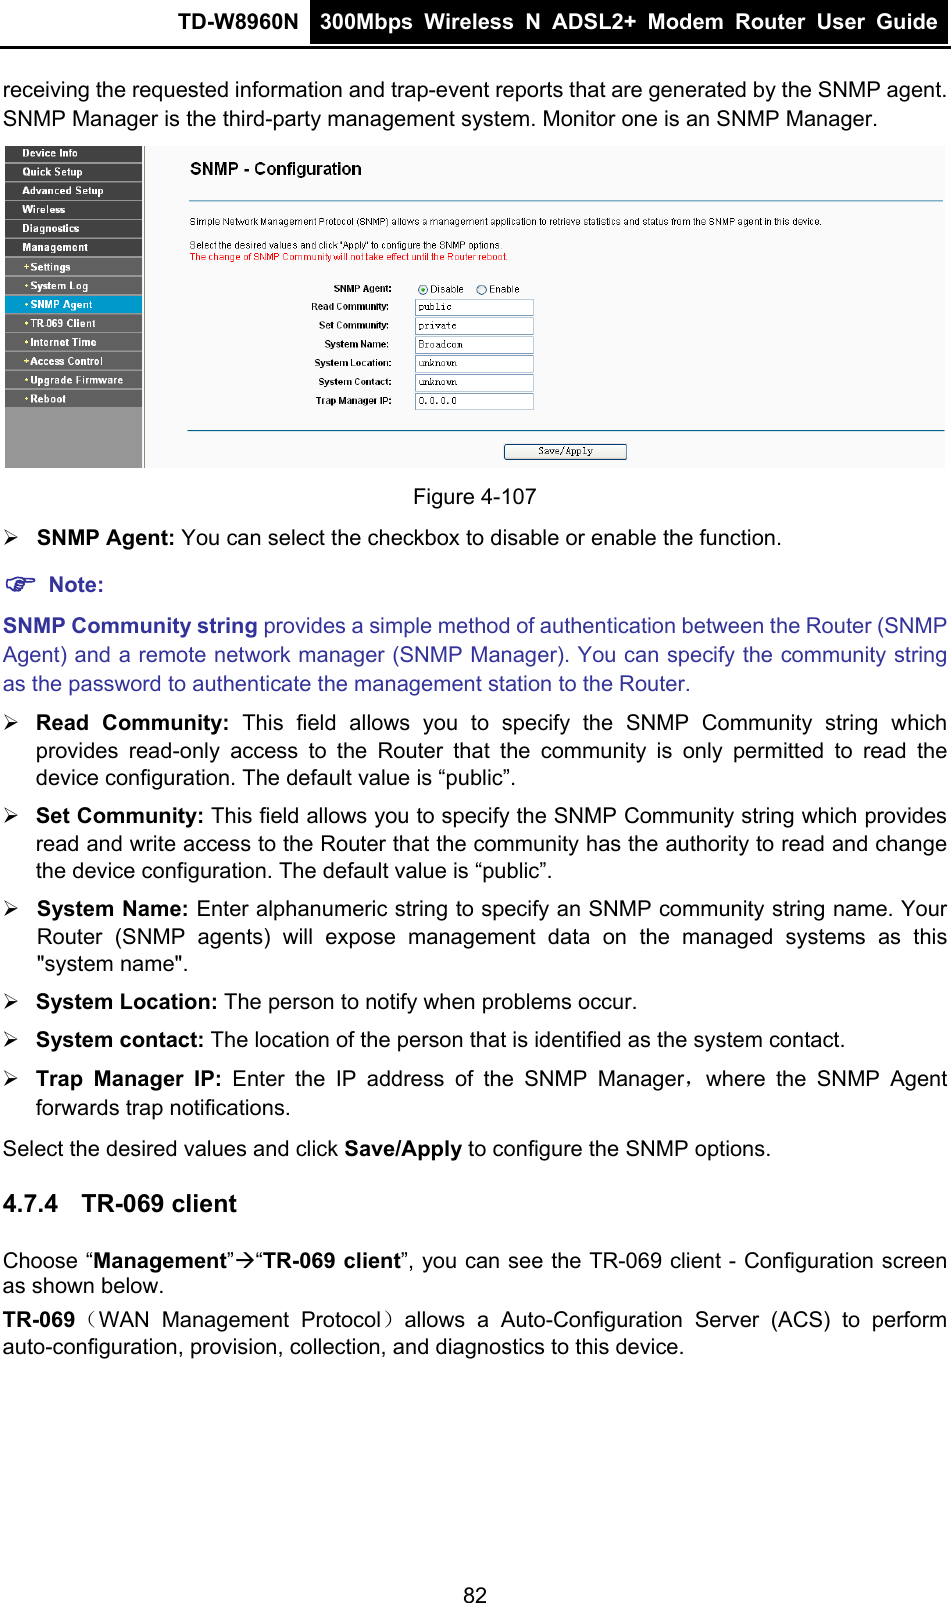 TD-W8960N  300Mbps Wireless N ADSL2+ Modem Router User Guide  receiving the requested information and trap-event reports that are generated by the SNMP agent. SNMP Manager is the third-party management system. Monitor one is an SNMP Manager.  Figure 4-107  SNMP Agent: You can select the checkbox to disable or enable the function.  Note: SNMP Community string provides a simple method of authentication between the Router (SNMP Agent) and a remote network manager (SNMP Manager). You can specify the community string as the password to authenticate the management station to the Router.  Read Community: This field allows you to specify the SNMP Community string which provides read-only access to the Router that the community is only permitted to read the device configuration. The default value is “public”.  Set Community: This field allows you to specify the SNMP Community string which provides read and write access to the Router that the community has the authority to read and change the device configuration. The default value is “public”.  System Name: Enter alphanumeric string to specify an SNMP community string name. Your Router (SNMP agents) will expose management data on the managed systems as this &quot;system name&quot;.  System Location: The person to notify when problems occur.  System contact: The location of the person that is identified as the system contact.  Trap Manager IP: Enter the IP address of the SNMP Manager，where the SNMP Agent forwards trap notifications. Select the desired values and click Save/Apply to configure the SNMP options. 4.7.4  TR-069 client Choose “Management”“TR-069 client”, you can see the TR-069 client - Configuration screen as shown below. TR-069（WAN Management Protocol）allows a Auto-Configuration Server (ACS) to perform auto-configuration, provision, collection, and diagnostics to this device. 82 